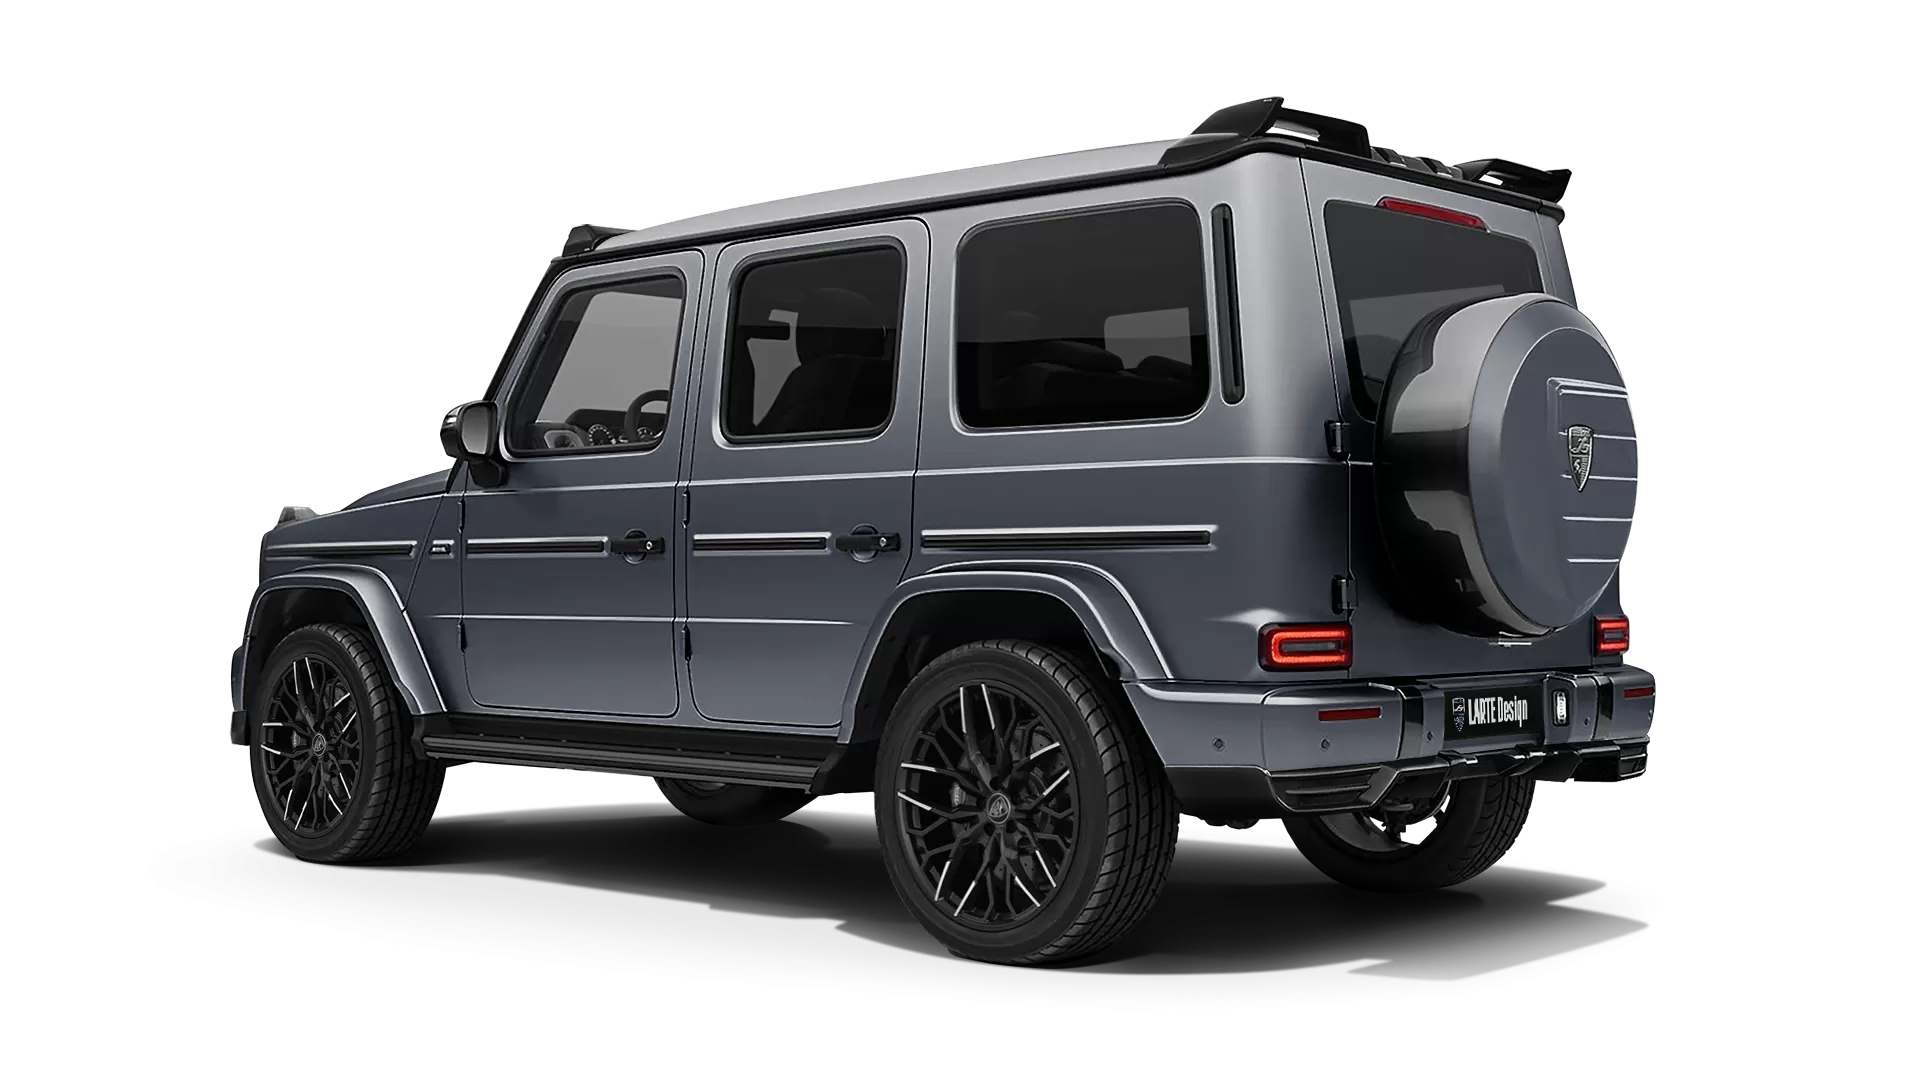 Mercedes G class W463 with painted body kit: rear view shown in Platinum Magno